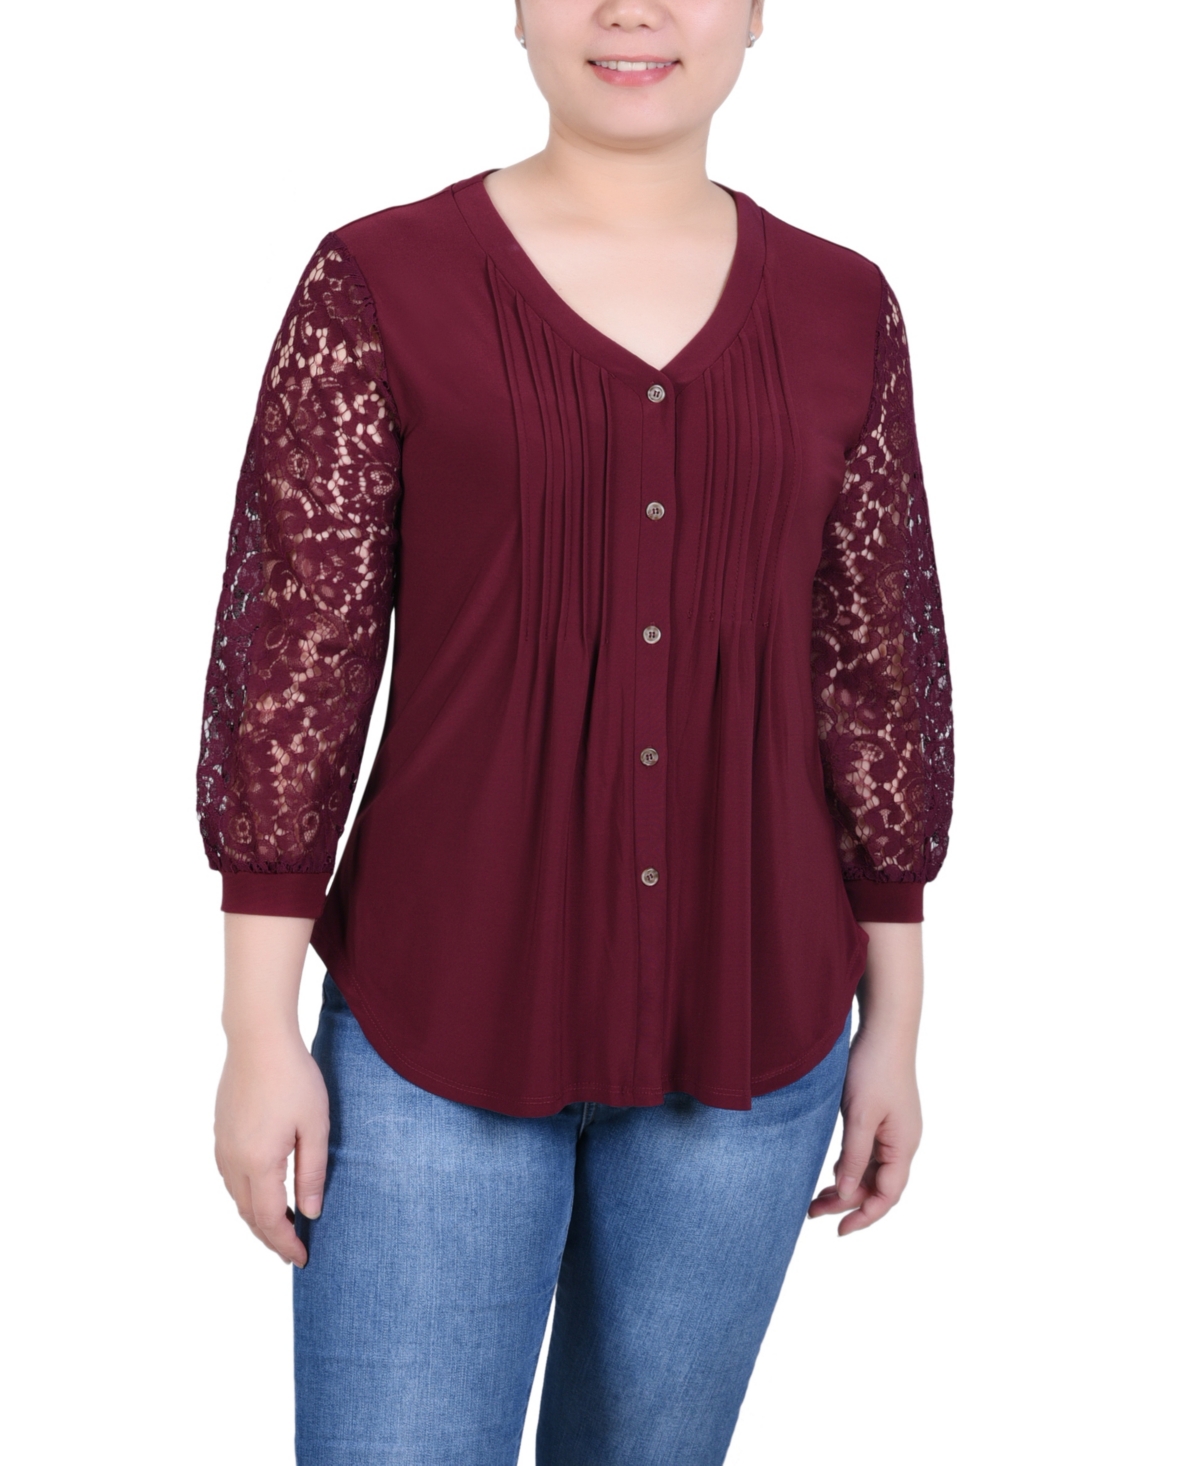 Women's Lace-Sleeve V-neck Top - Rhododendron